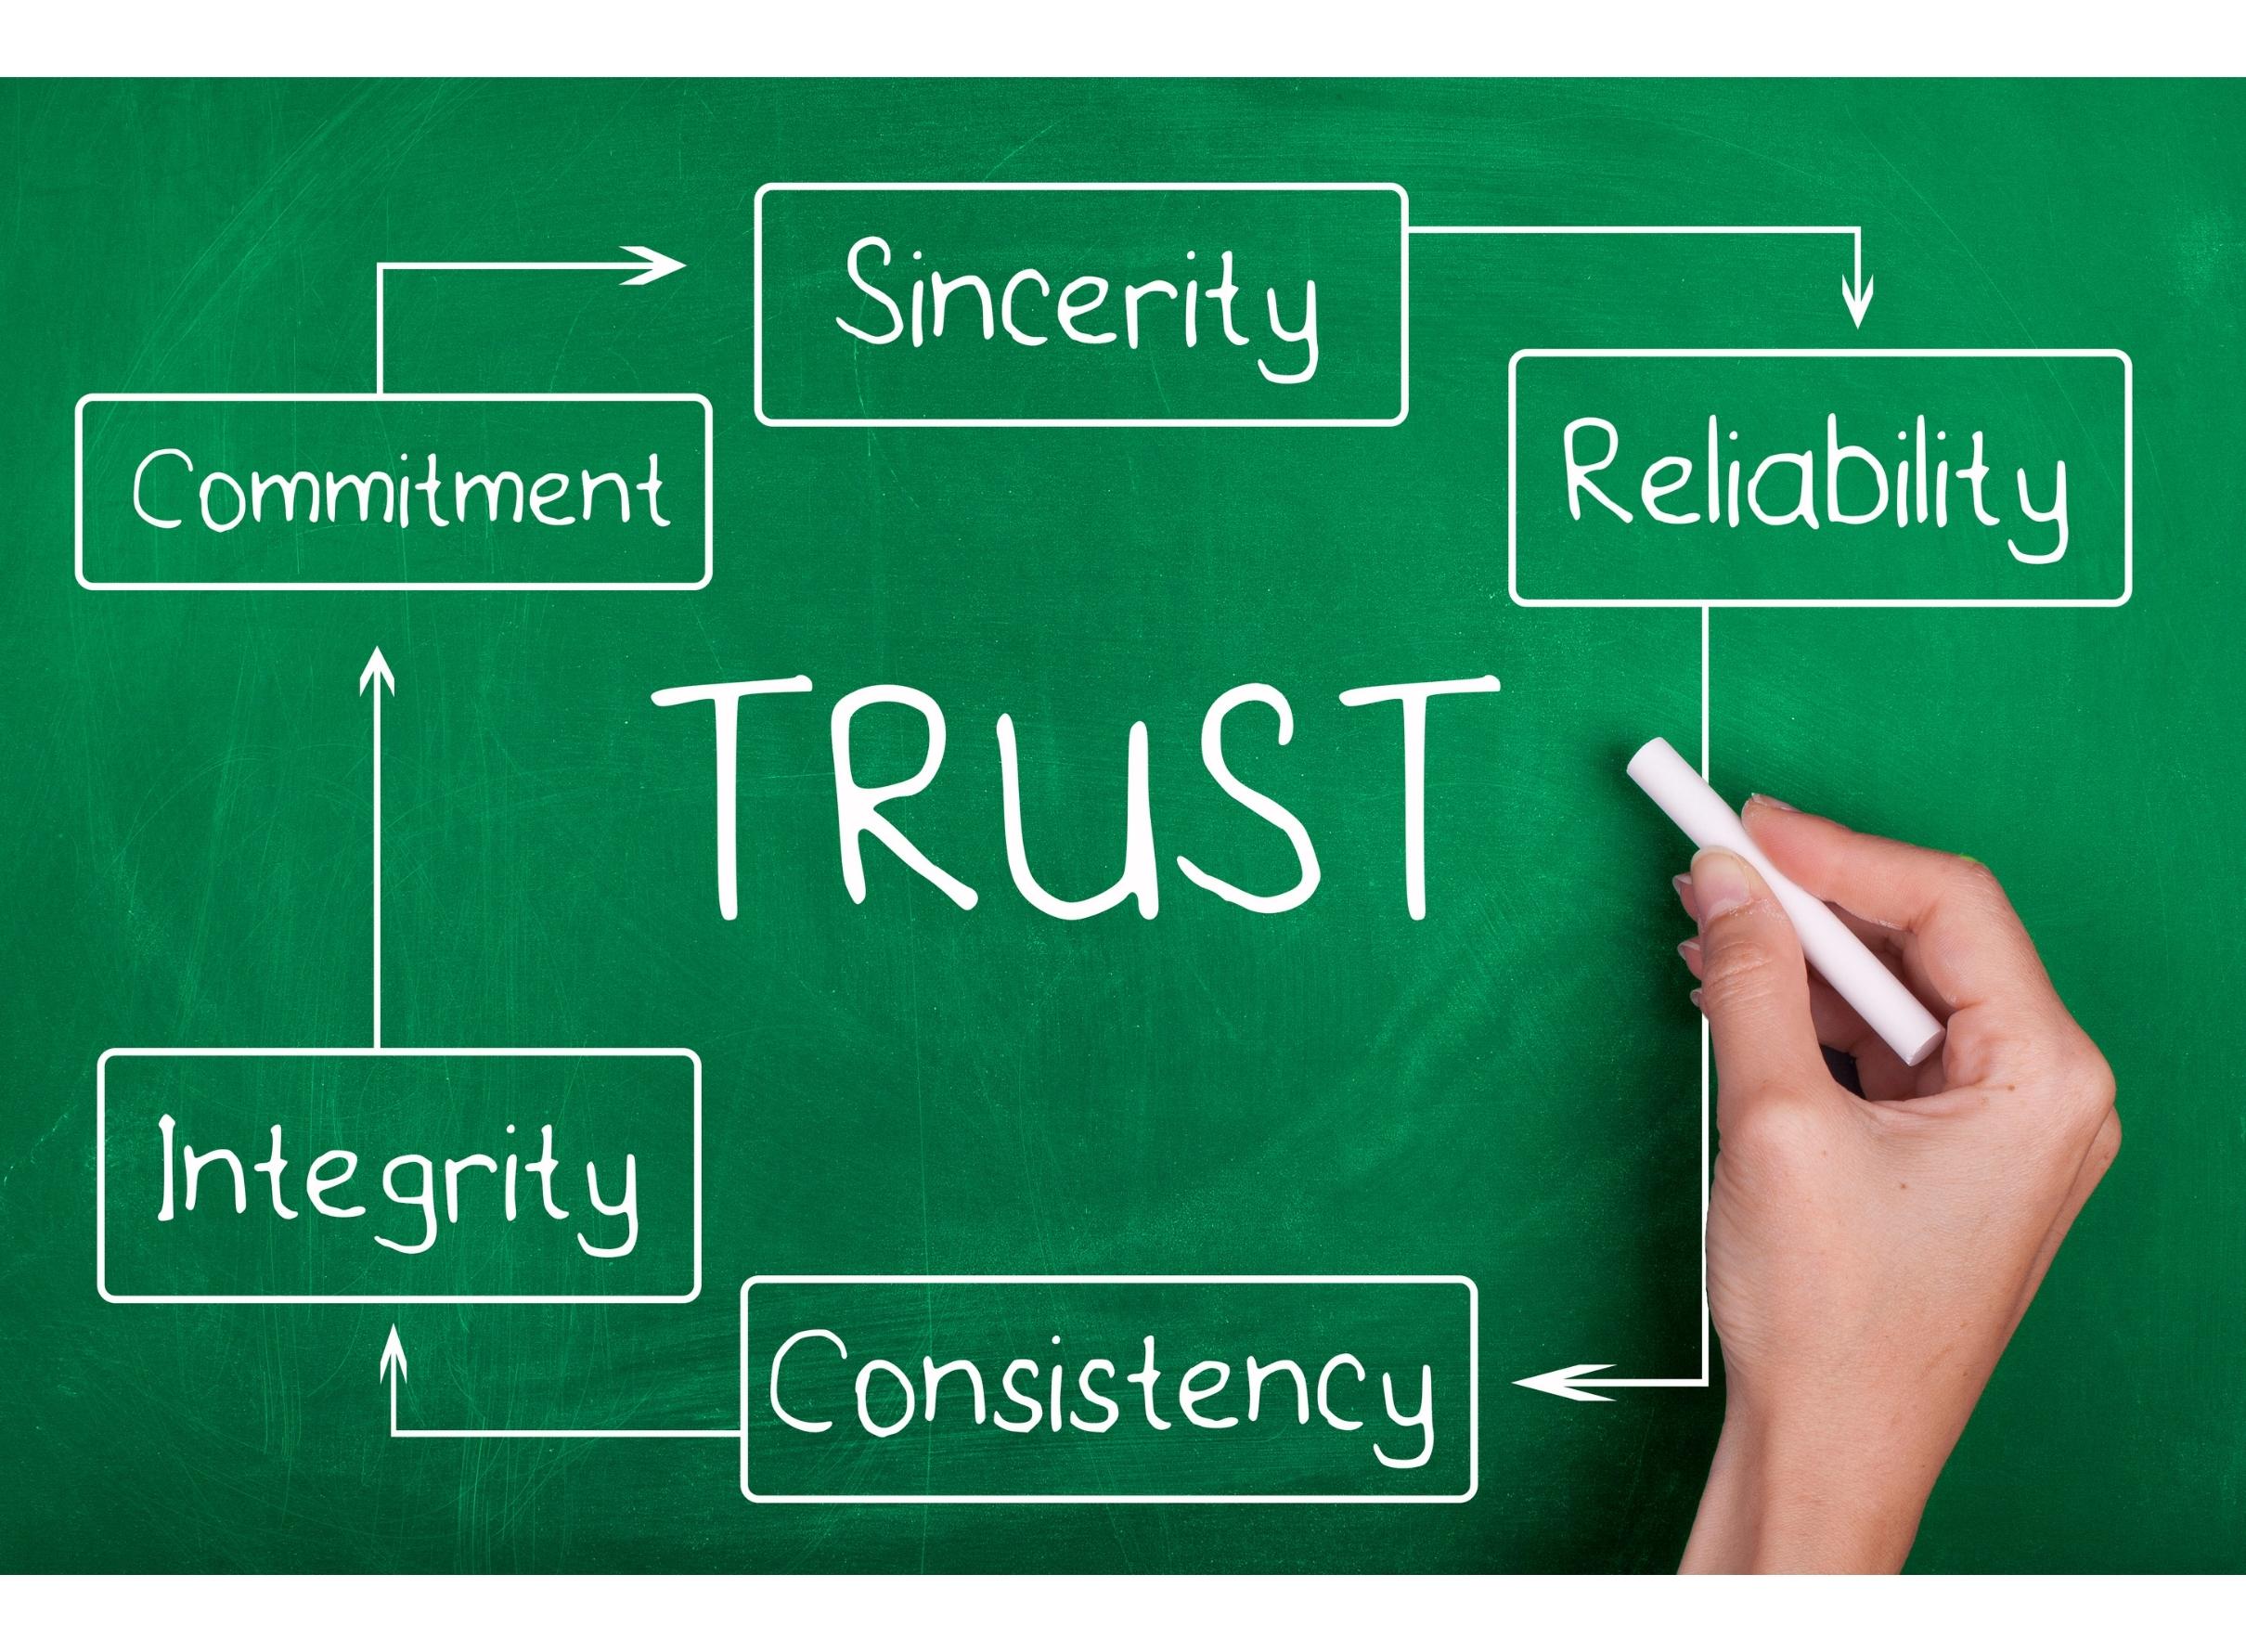 Graphic with word “Trust” in middle, surrounded by: Commitment, Integrity, Consistency, Reliability, Sincerity.